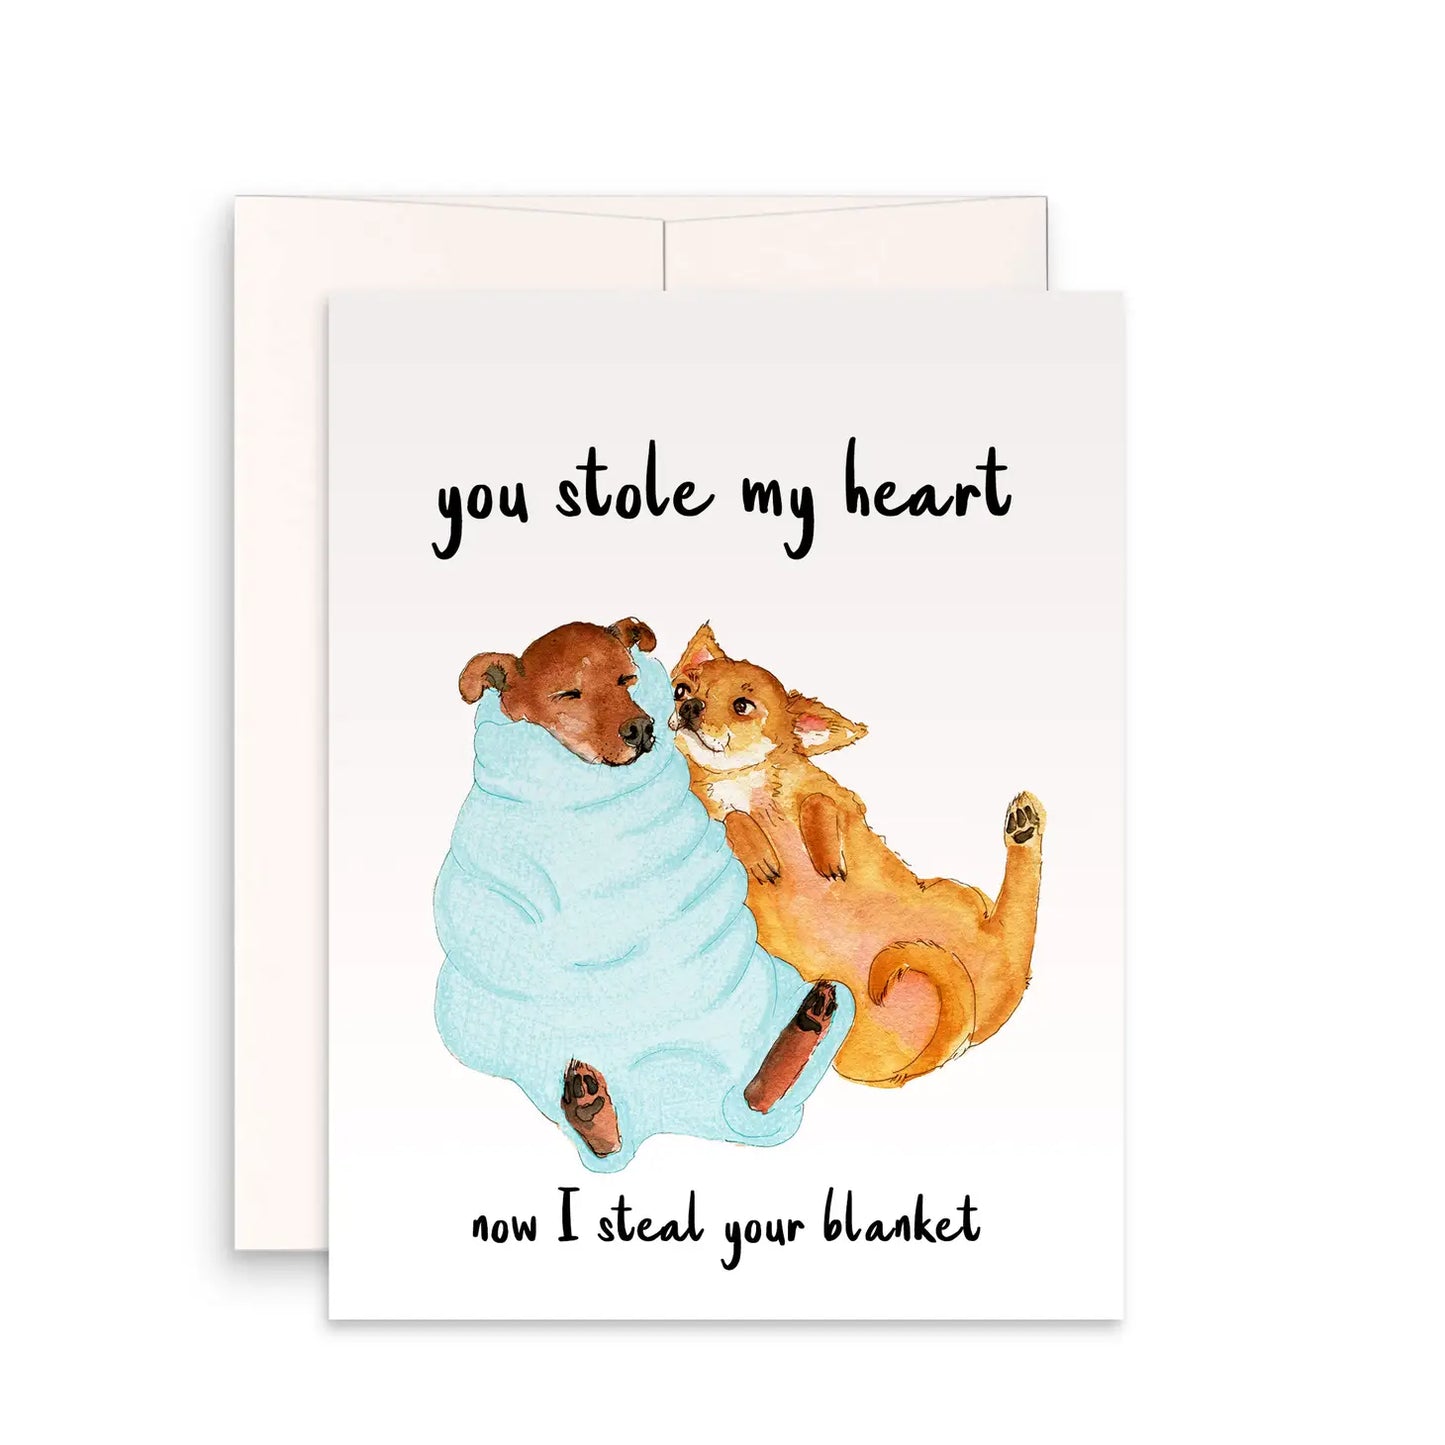 card that says you stole my heart now I steal your blanket with two dogs